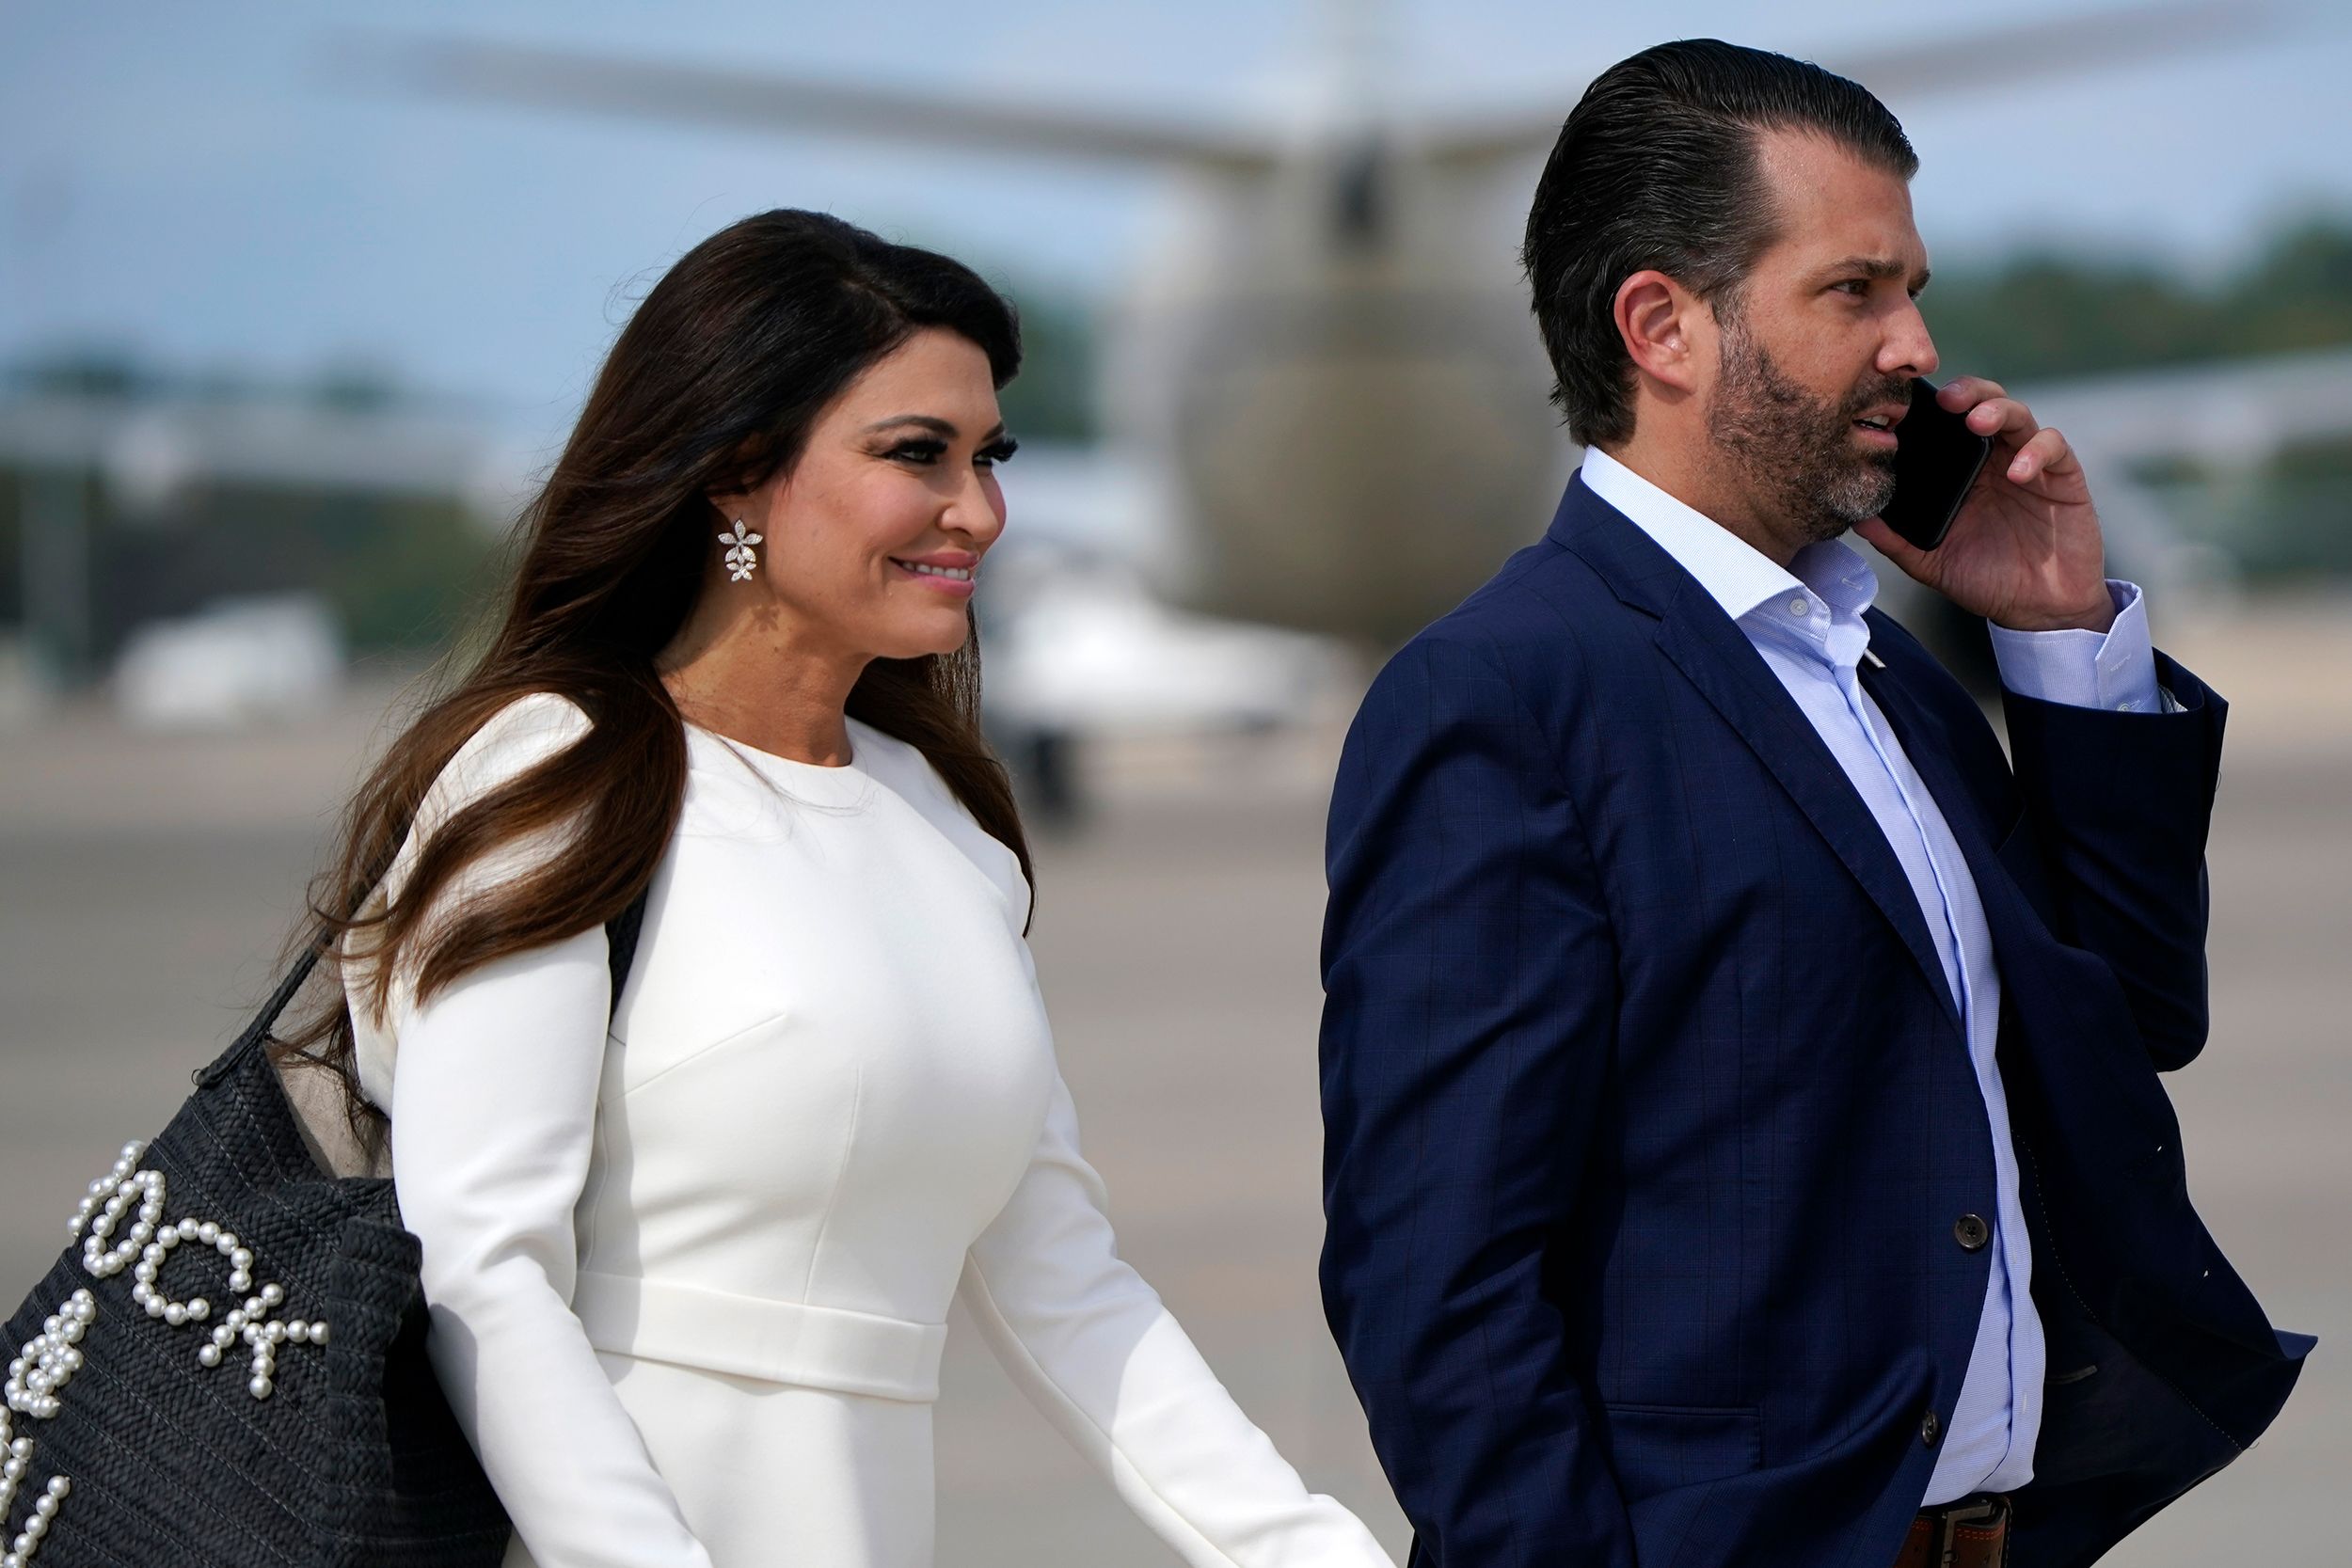 Fox News paid Kimberly Guilfoyle's former assistant $4 million after sexual  harassment accusations, New Yorker reports | CNN Business